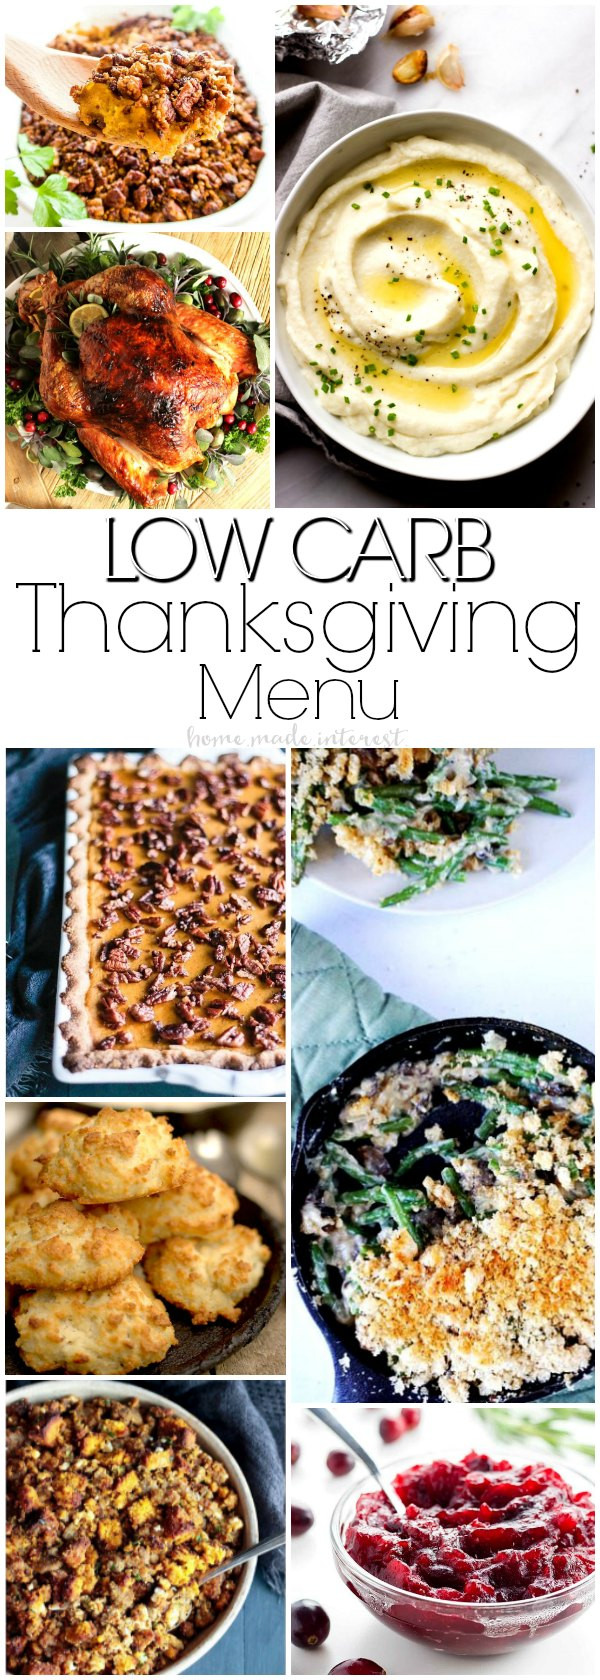 Low Carb Thanksgiving Recipes
 low carb thanksgiving recipes